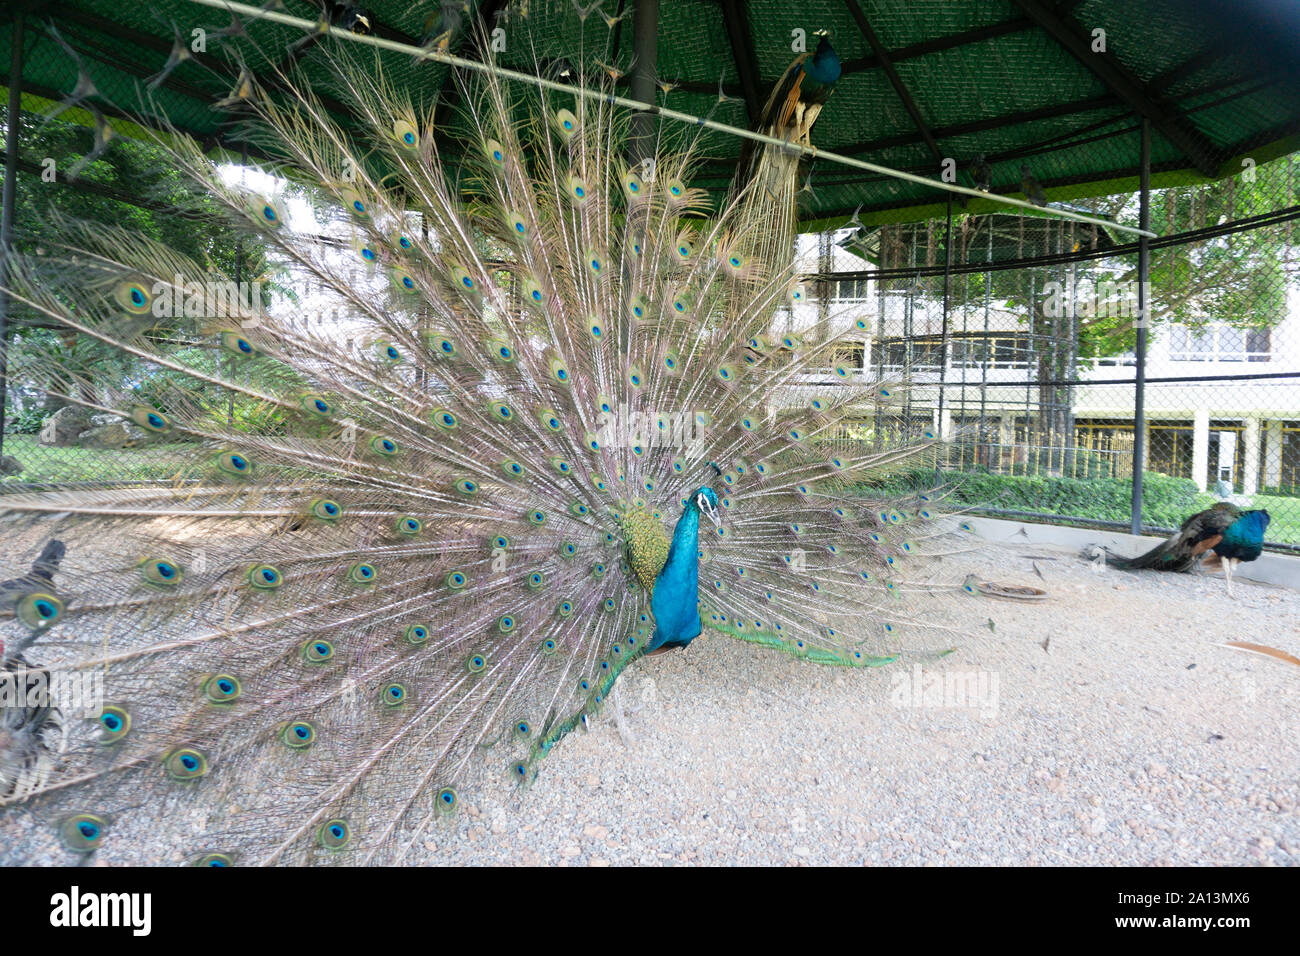 A proud peacock spreading its wings and feathers in an encapsulation cage of a zoo. Stock Photo